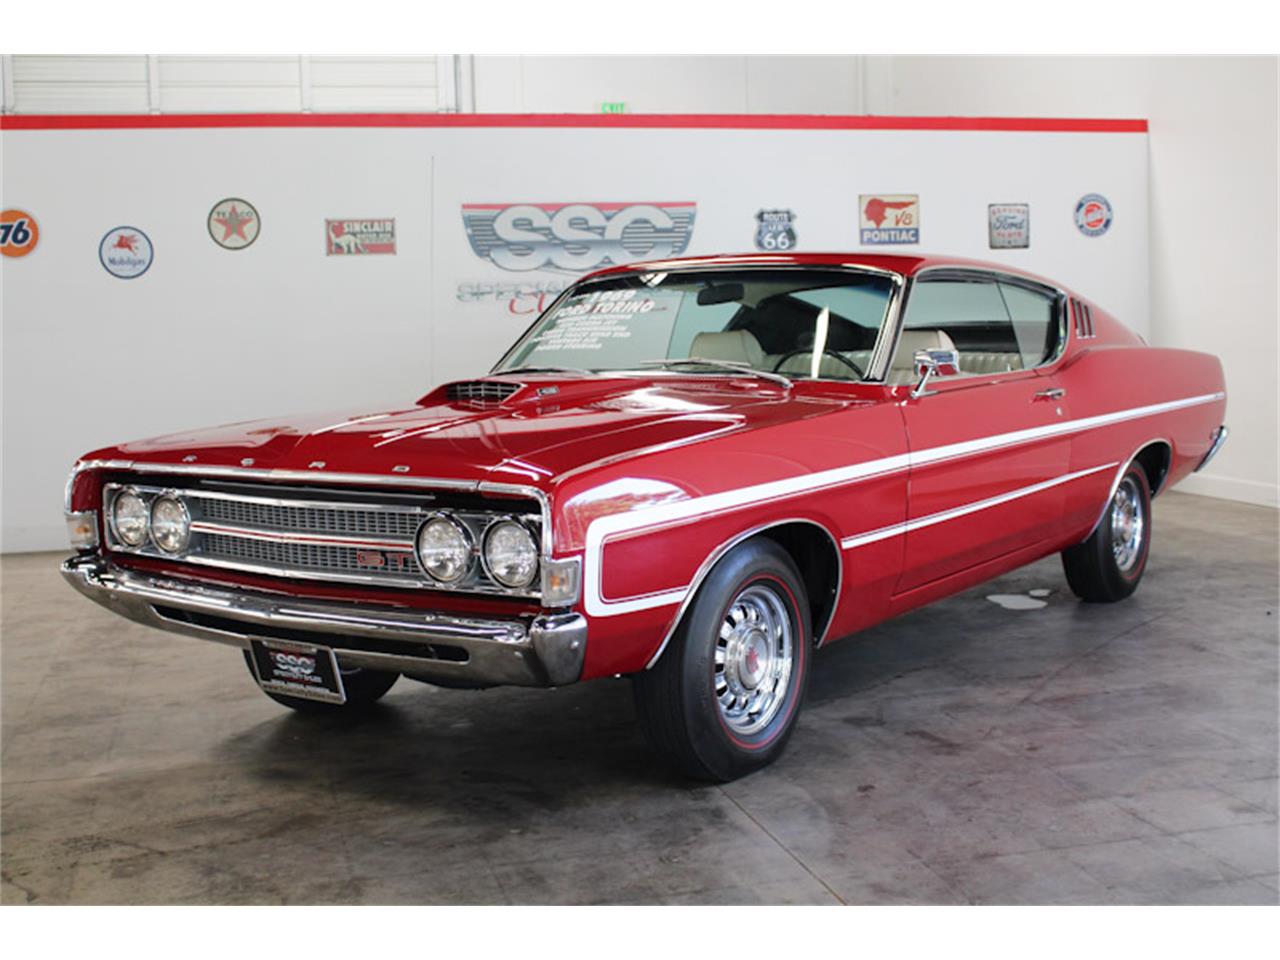 1969 Ford Torino for sale in Fairfield, CA - photo 2.